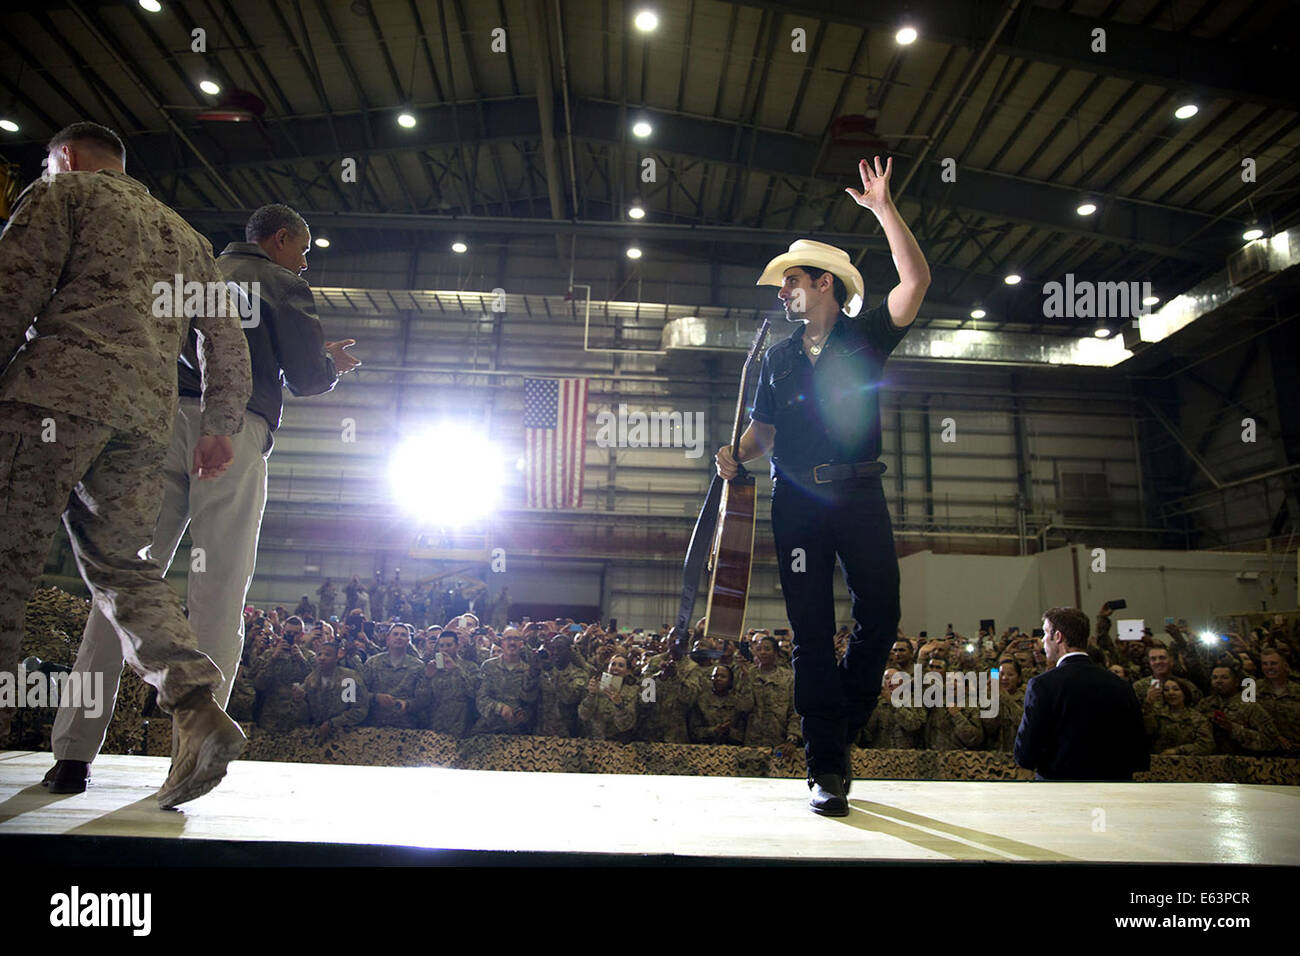 Country singer Brad Paisley leaves the stage as President Barack Obama and Gen. Joseph F. Dunford, Jr, Commander of International Security Assistance Force and United States Forces-Afghanistan arrive to address U.S. troops during a rally at Bagram Airfiel Stock Photo